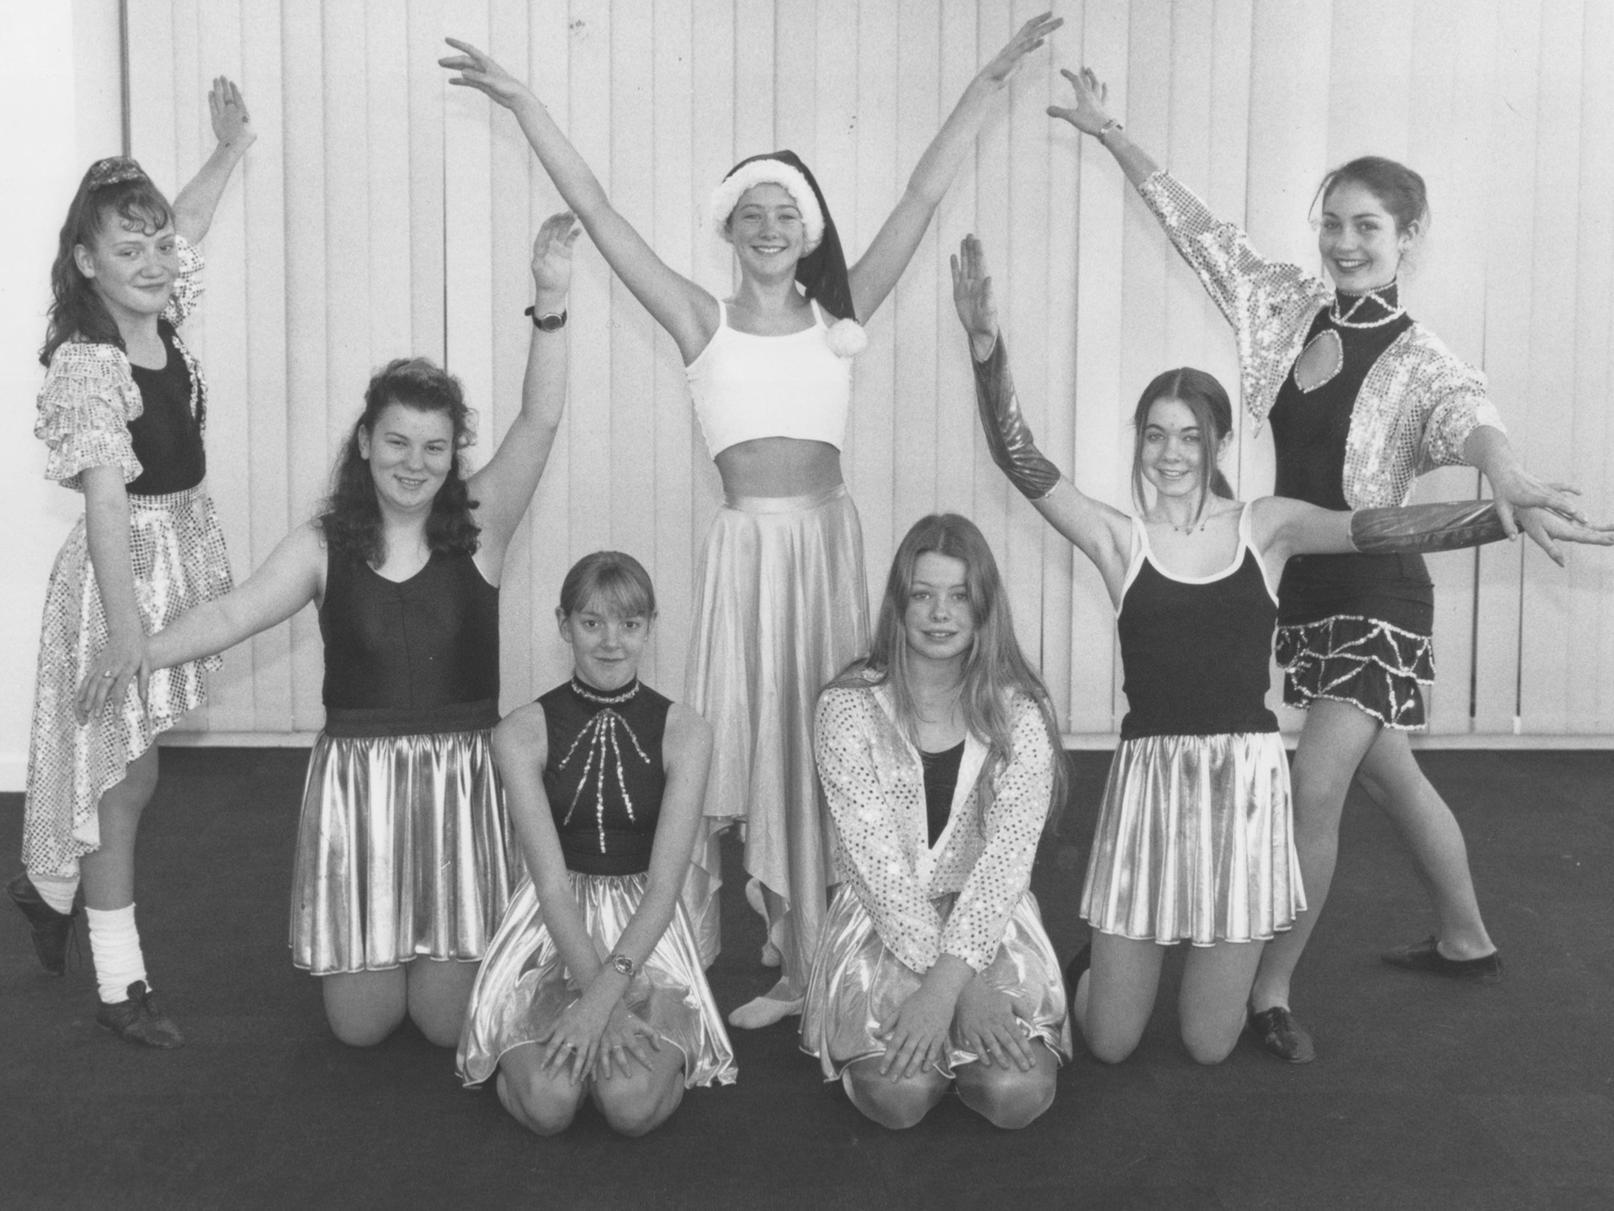 Getting set to take part in the forthcoming Pindar School Christmas concert in December 1997 are dancers, back from left, Donna Thompson, Michelle Mennell, Laura Anfield, Nina Potter and Alex Fogal; front, Louise Pollard and Jennifer Linton.